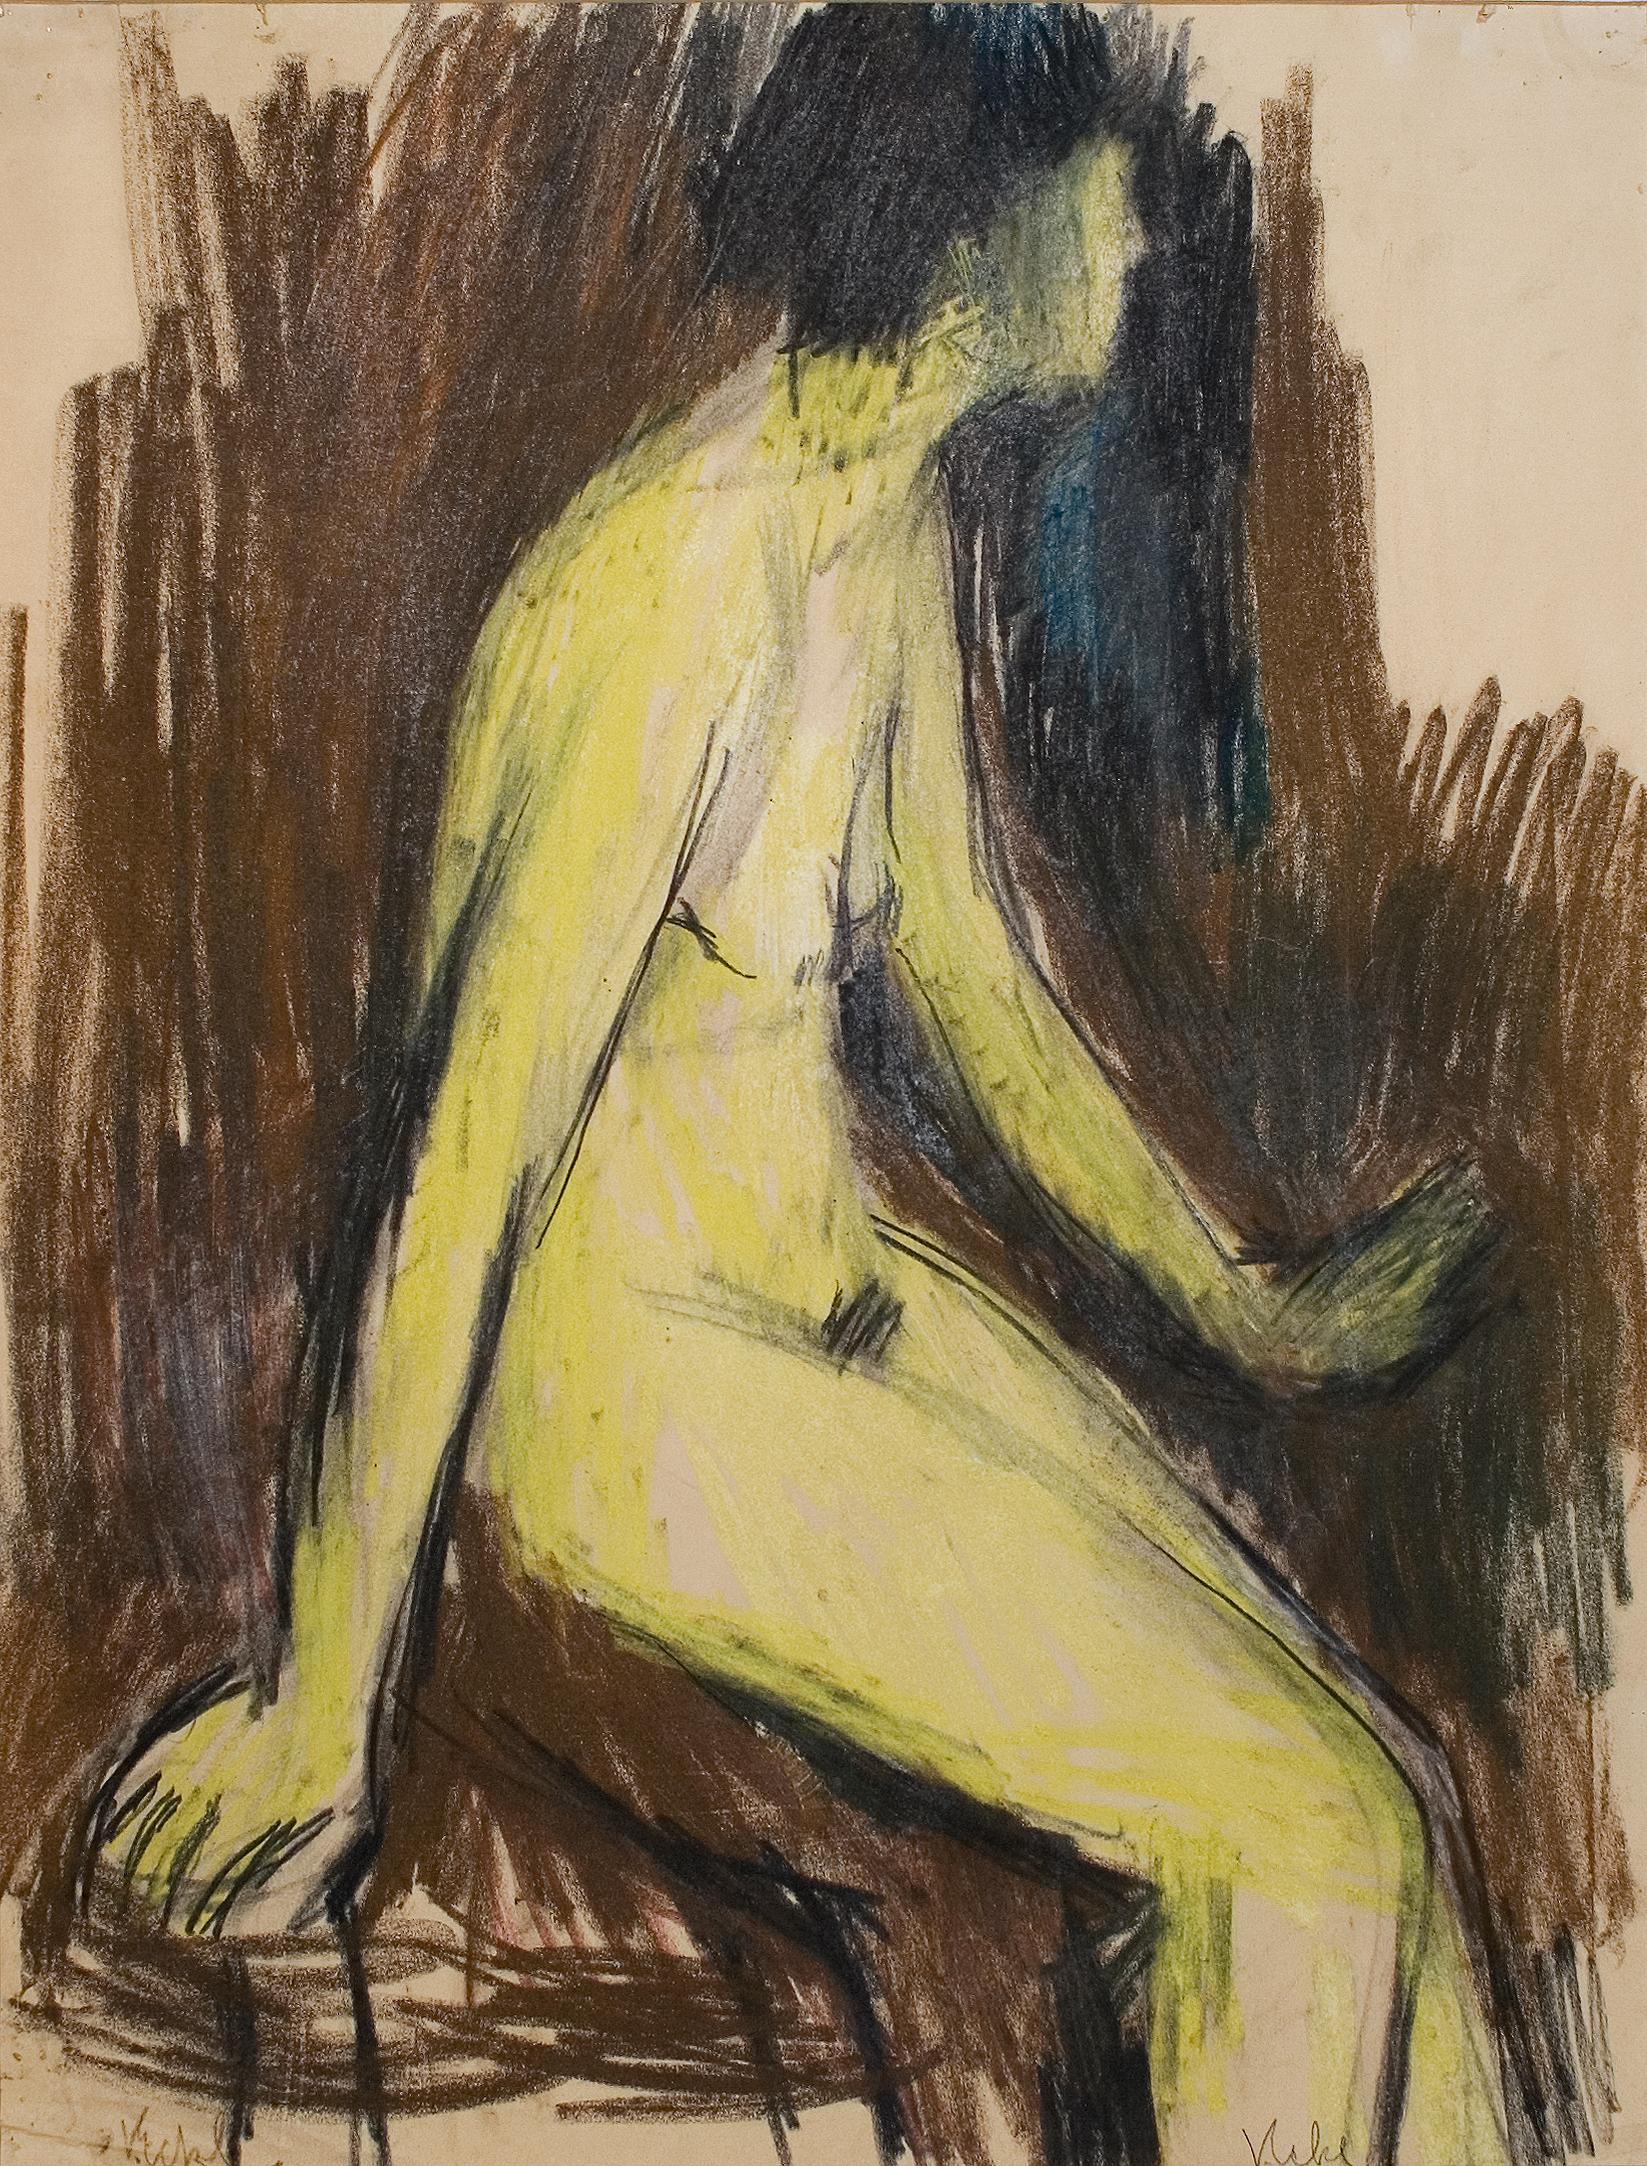 Sitzende (Sitting Nude) - Color Crayon, Female Nude, Expressionist, Drawing - Art by Vilma Eckl